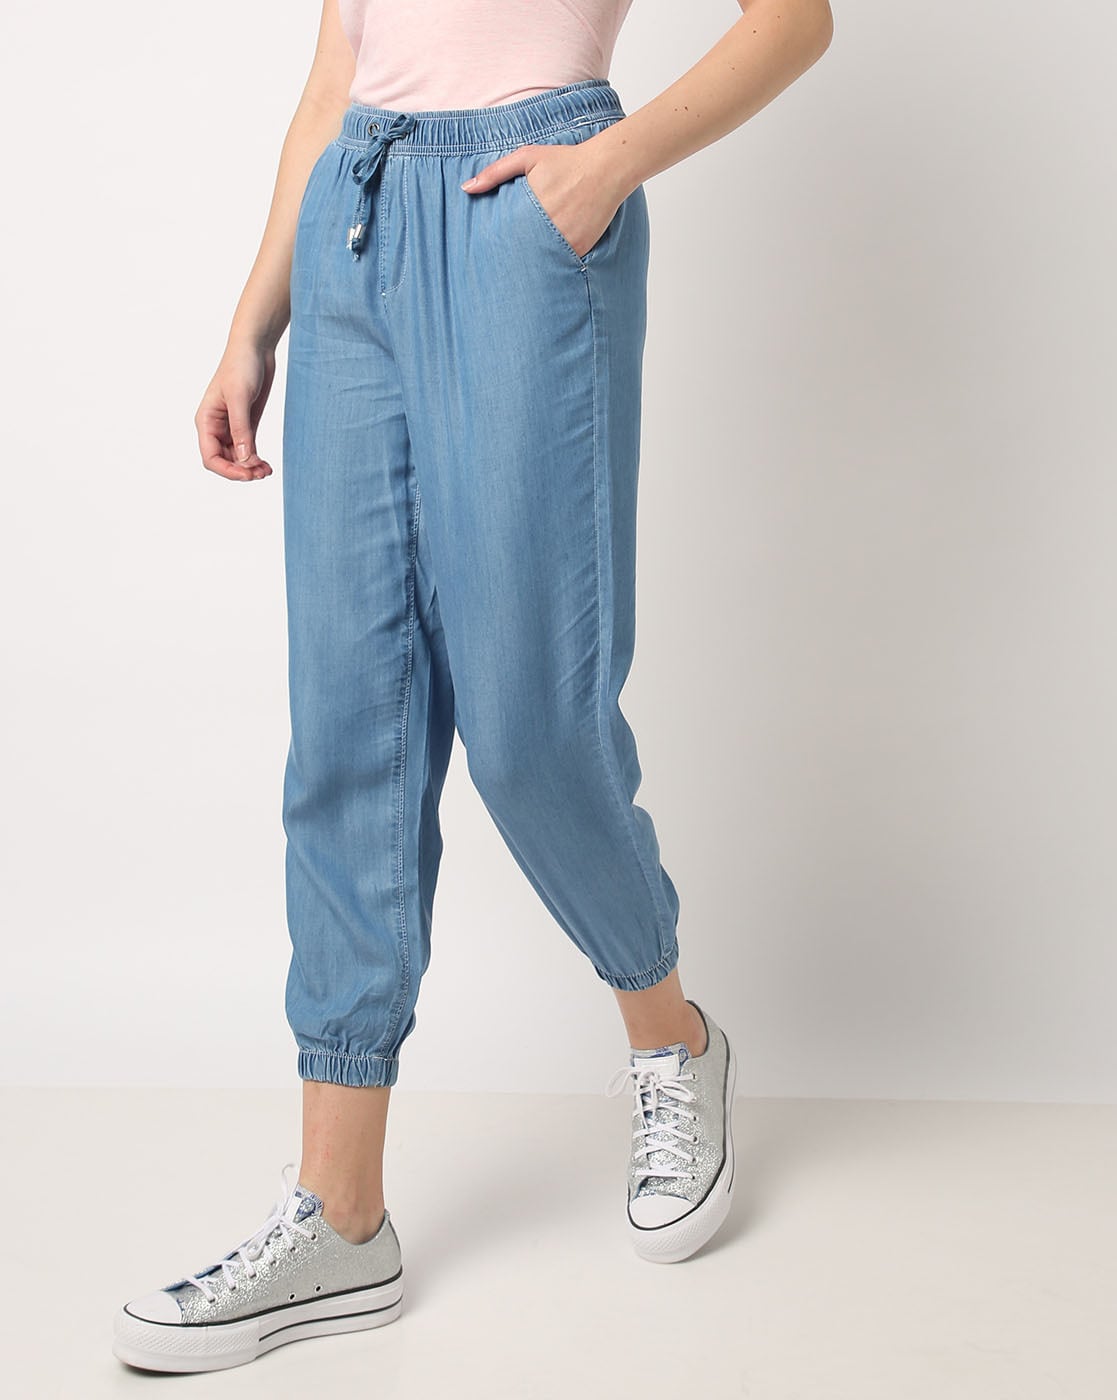 Buy SKP Fashion Blue Women's Denim Joggers | SKP | 34 | Online at Lowest  Price Ever in India | Check Reviews & Ratings - Shop The World